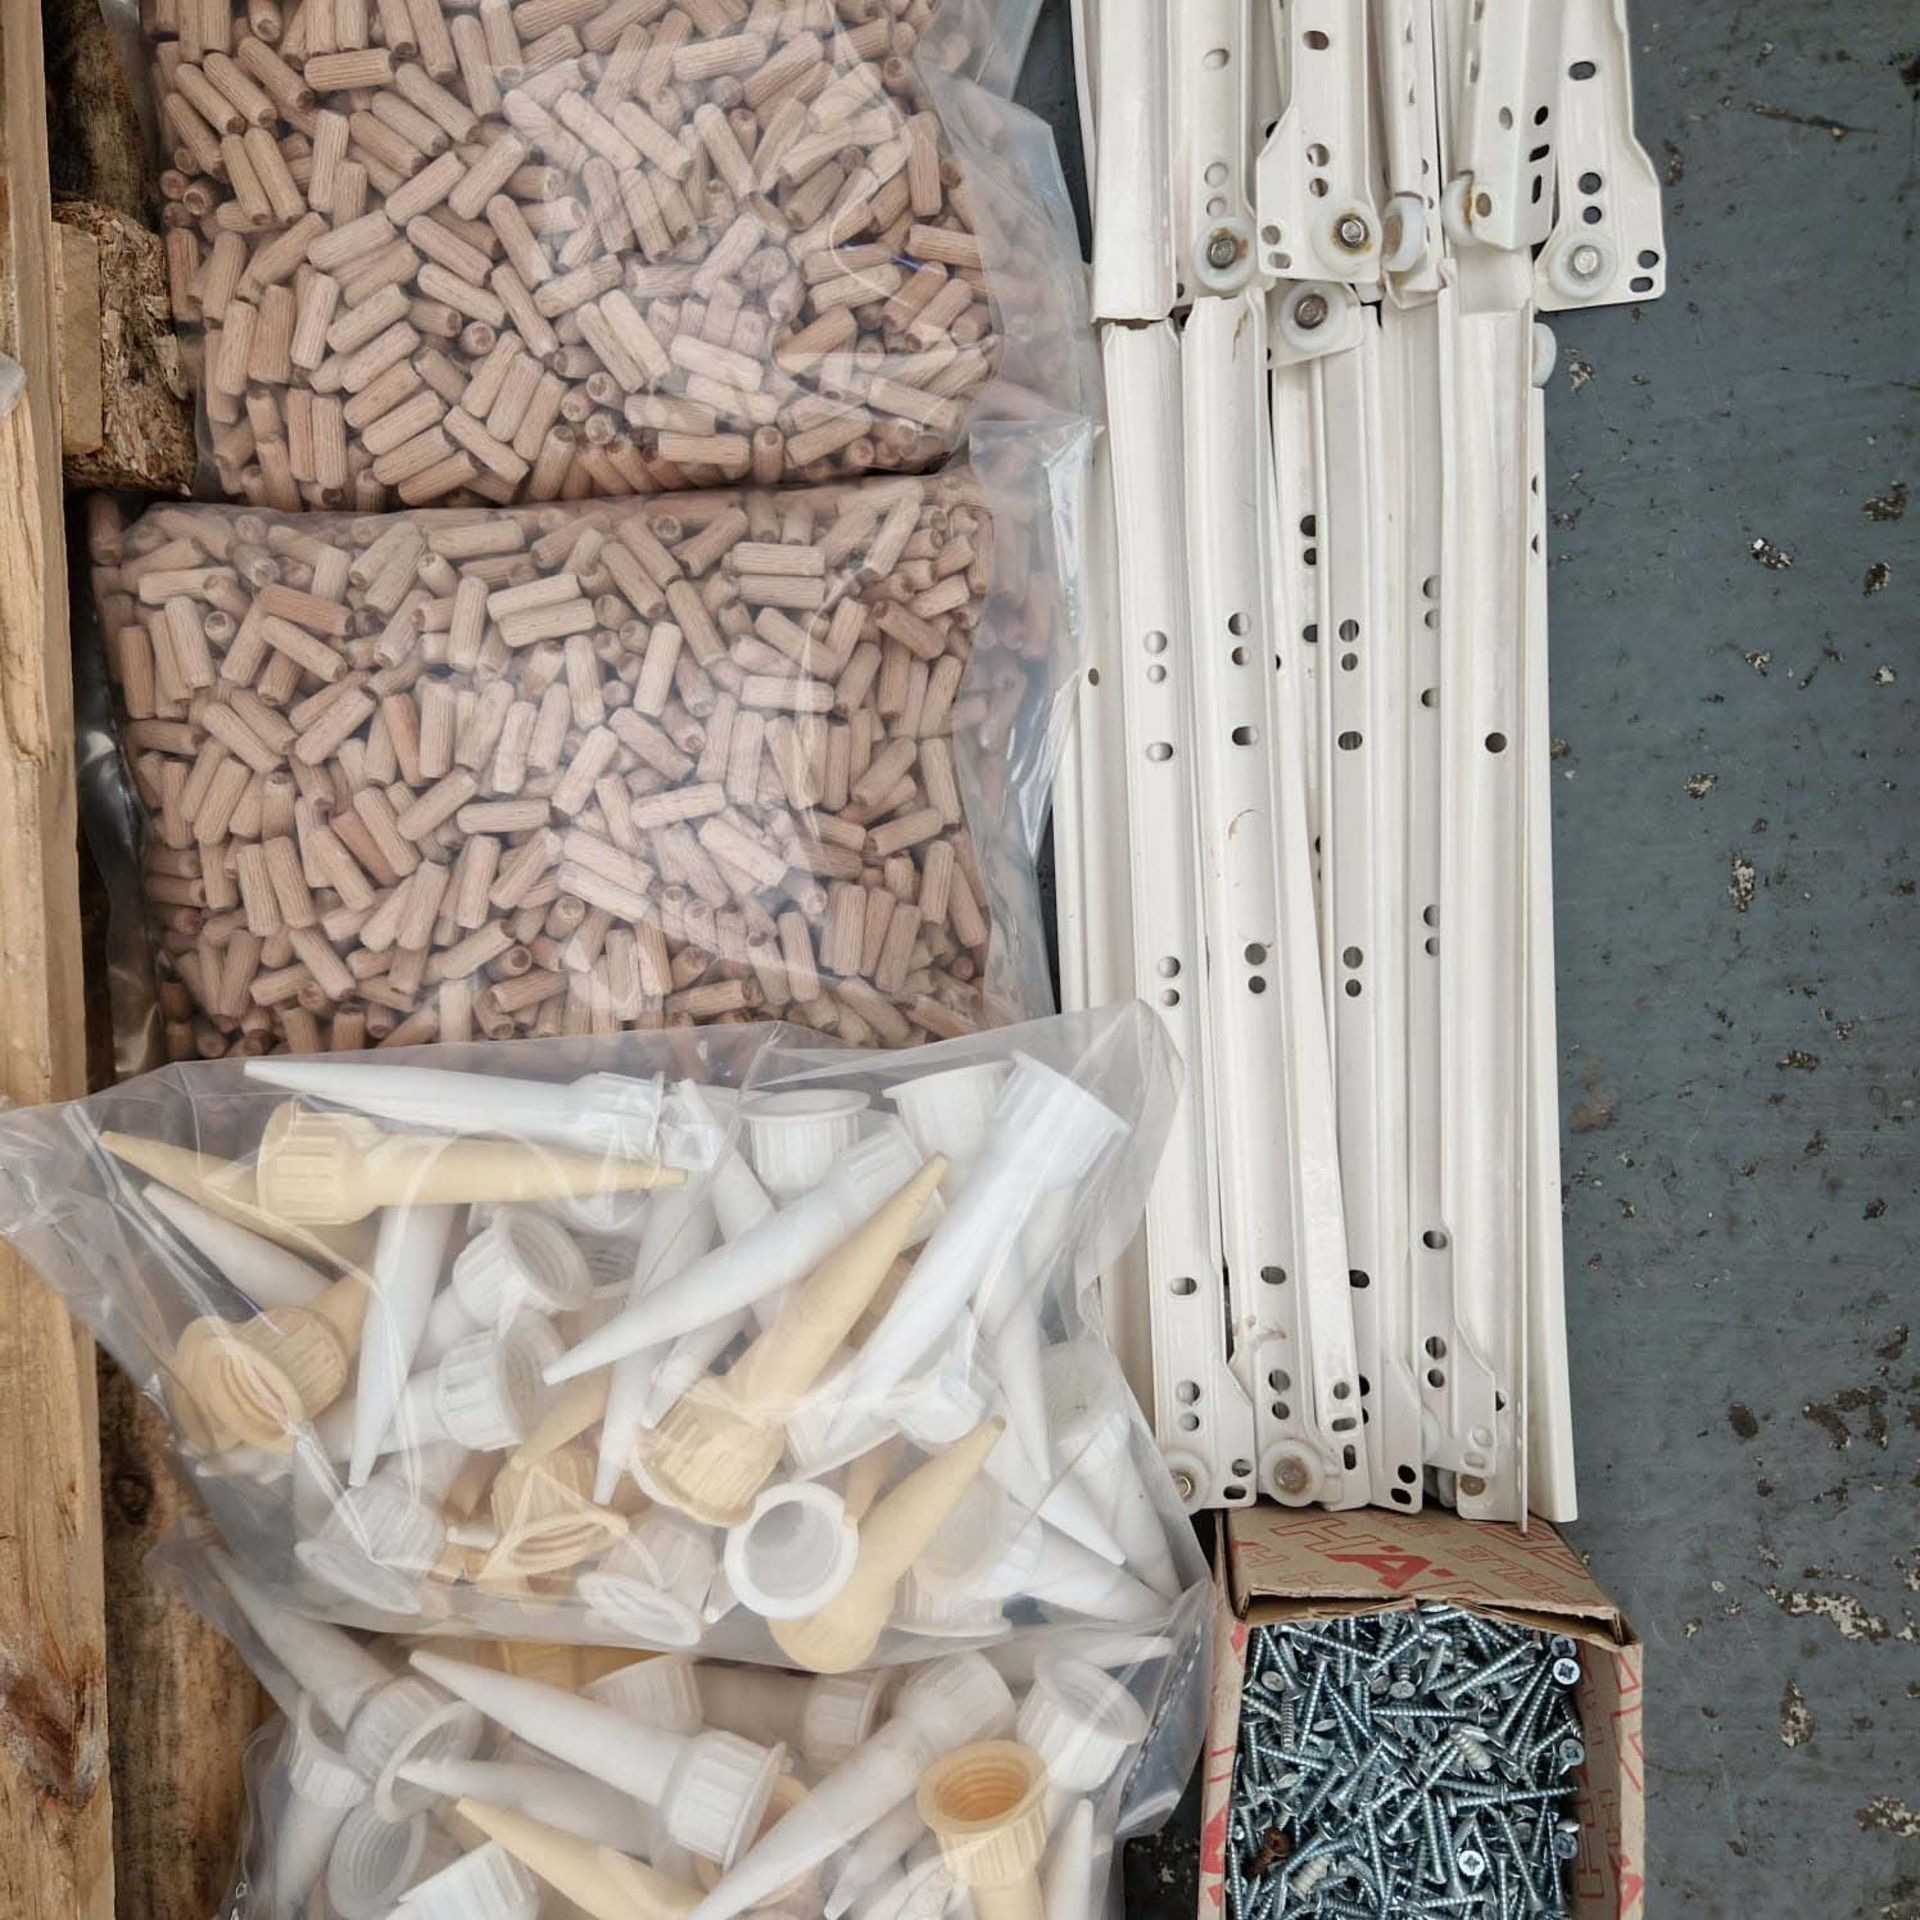 Quantity of Various Screws, Dowels & Hinges Etc. For Woodworking. - Image 3 of 24